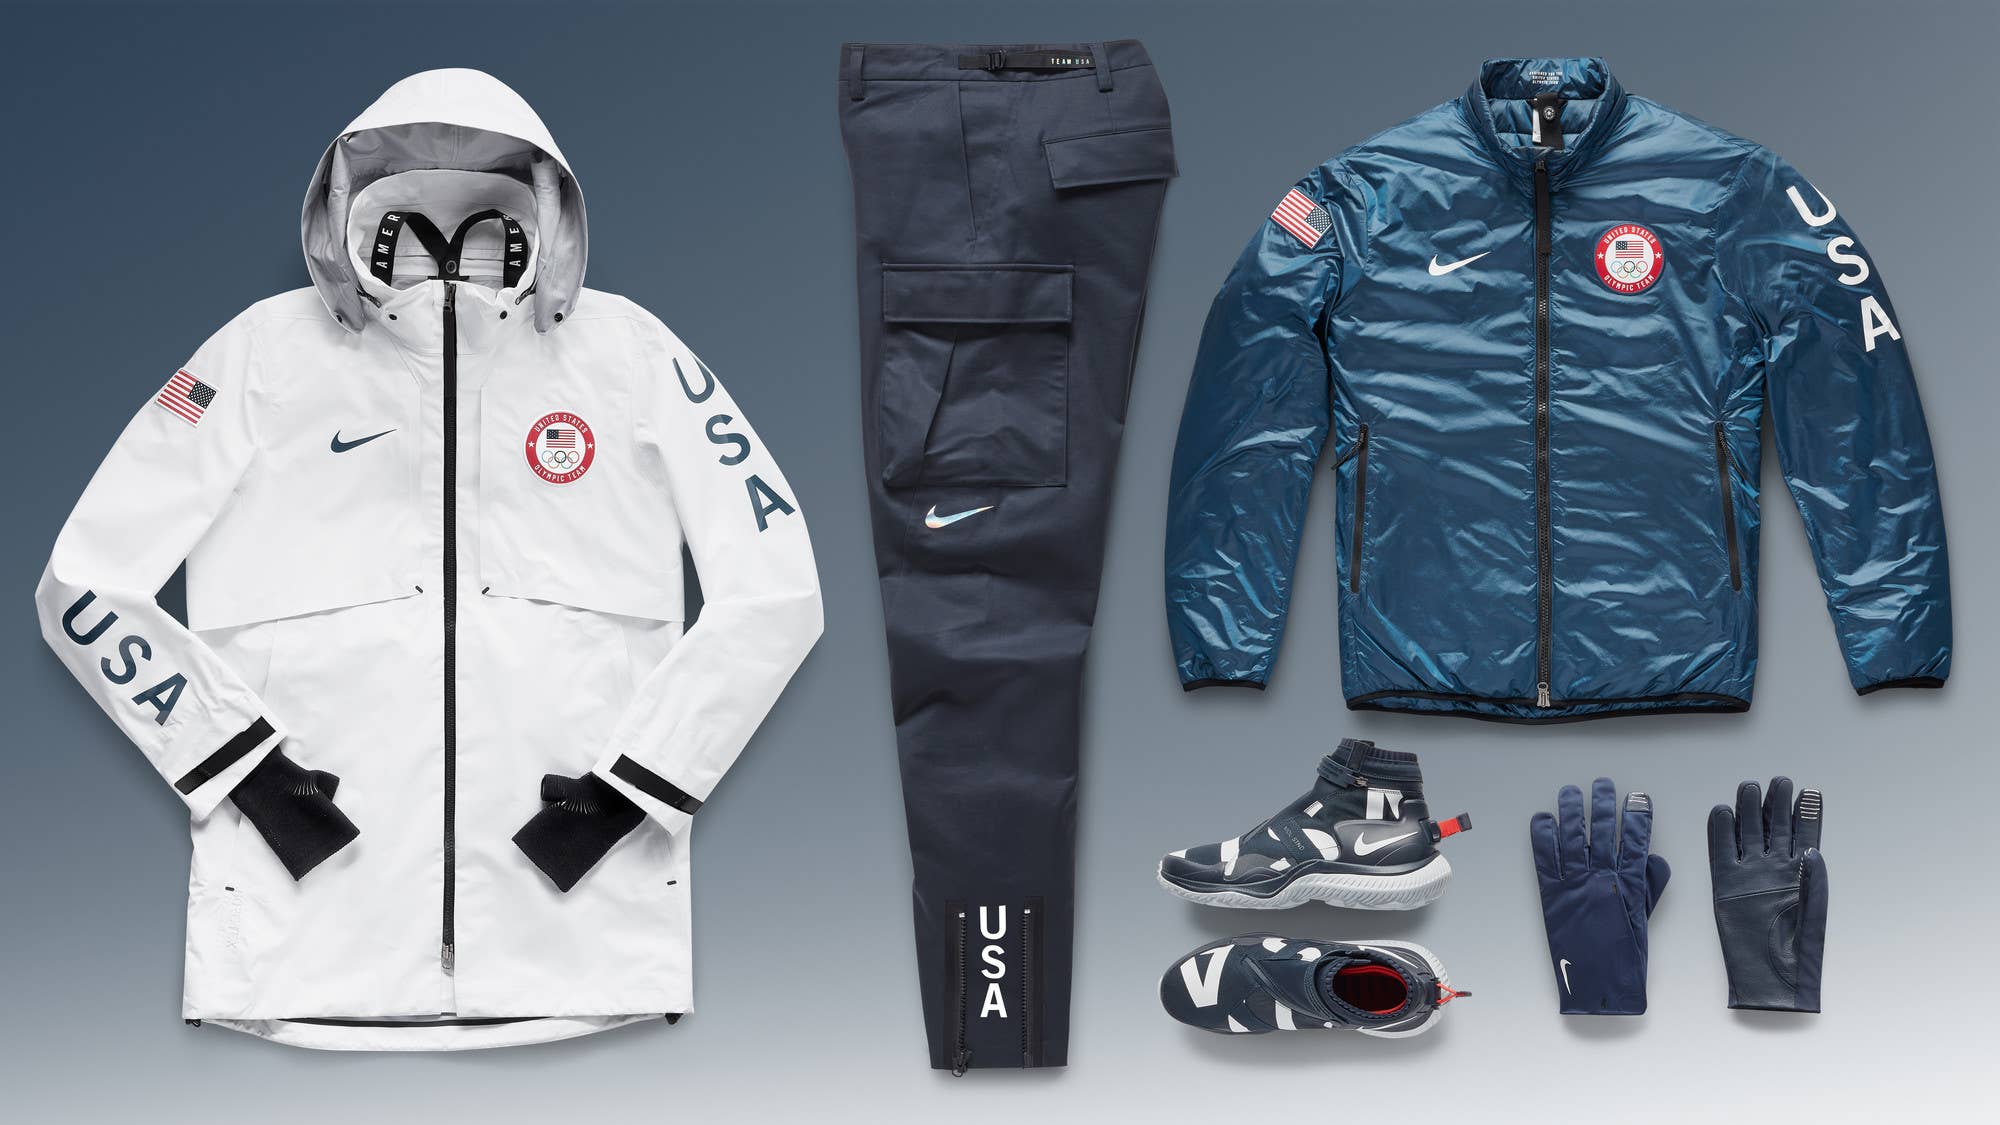 Grammatica Psychiatrie Carry Nike's Team USA Medal Stand Apparel for the 2018 Winter Olympics | Complex